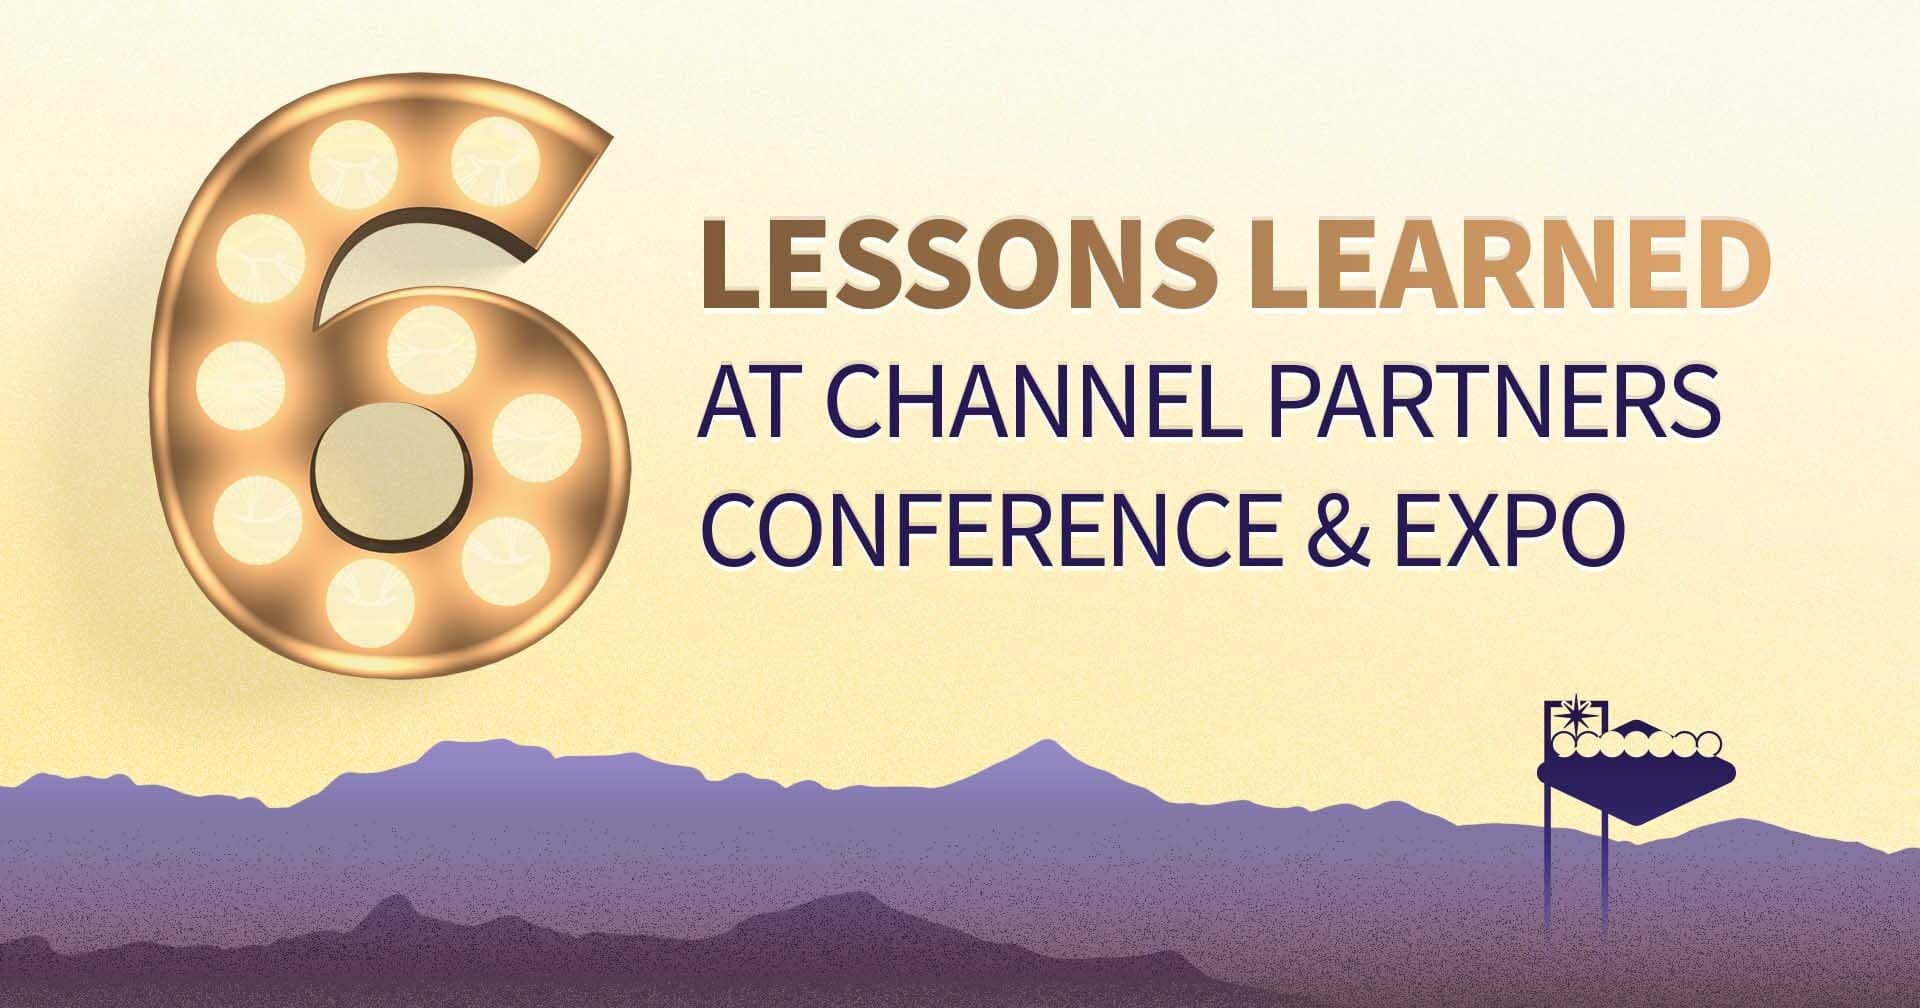 6 Lessons Learned from this Year's Channel Partners Conference & Expo